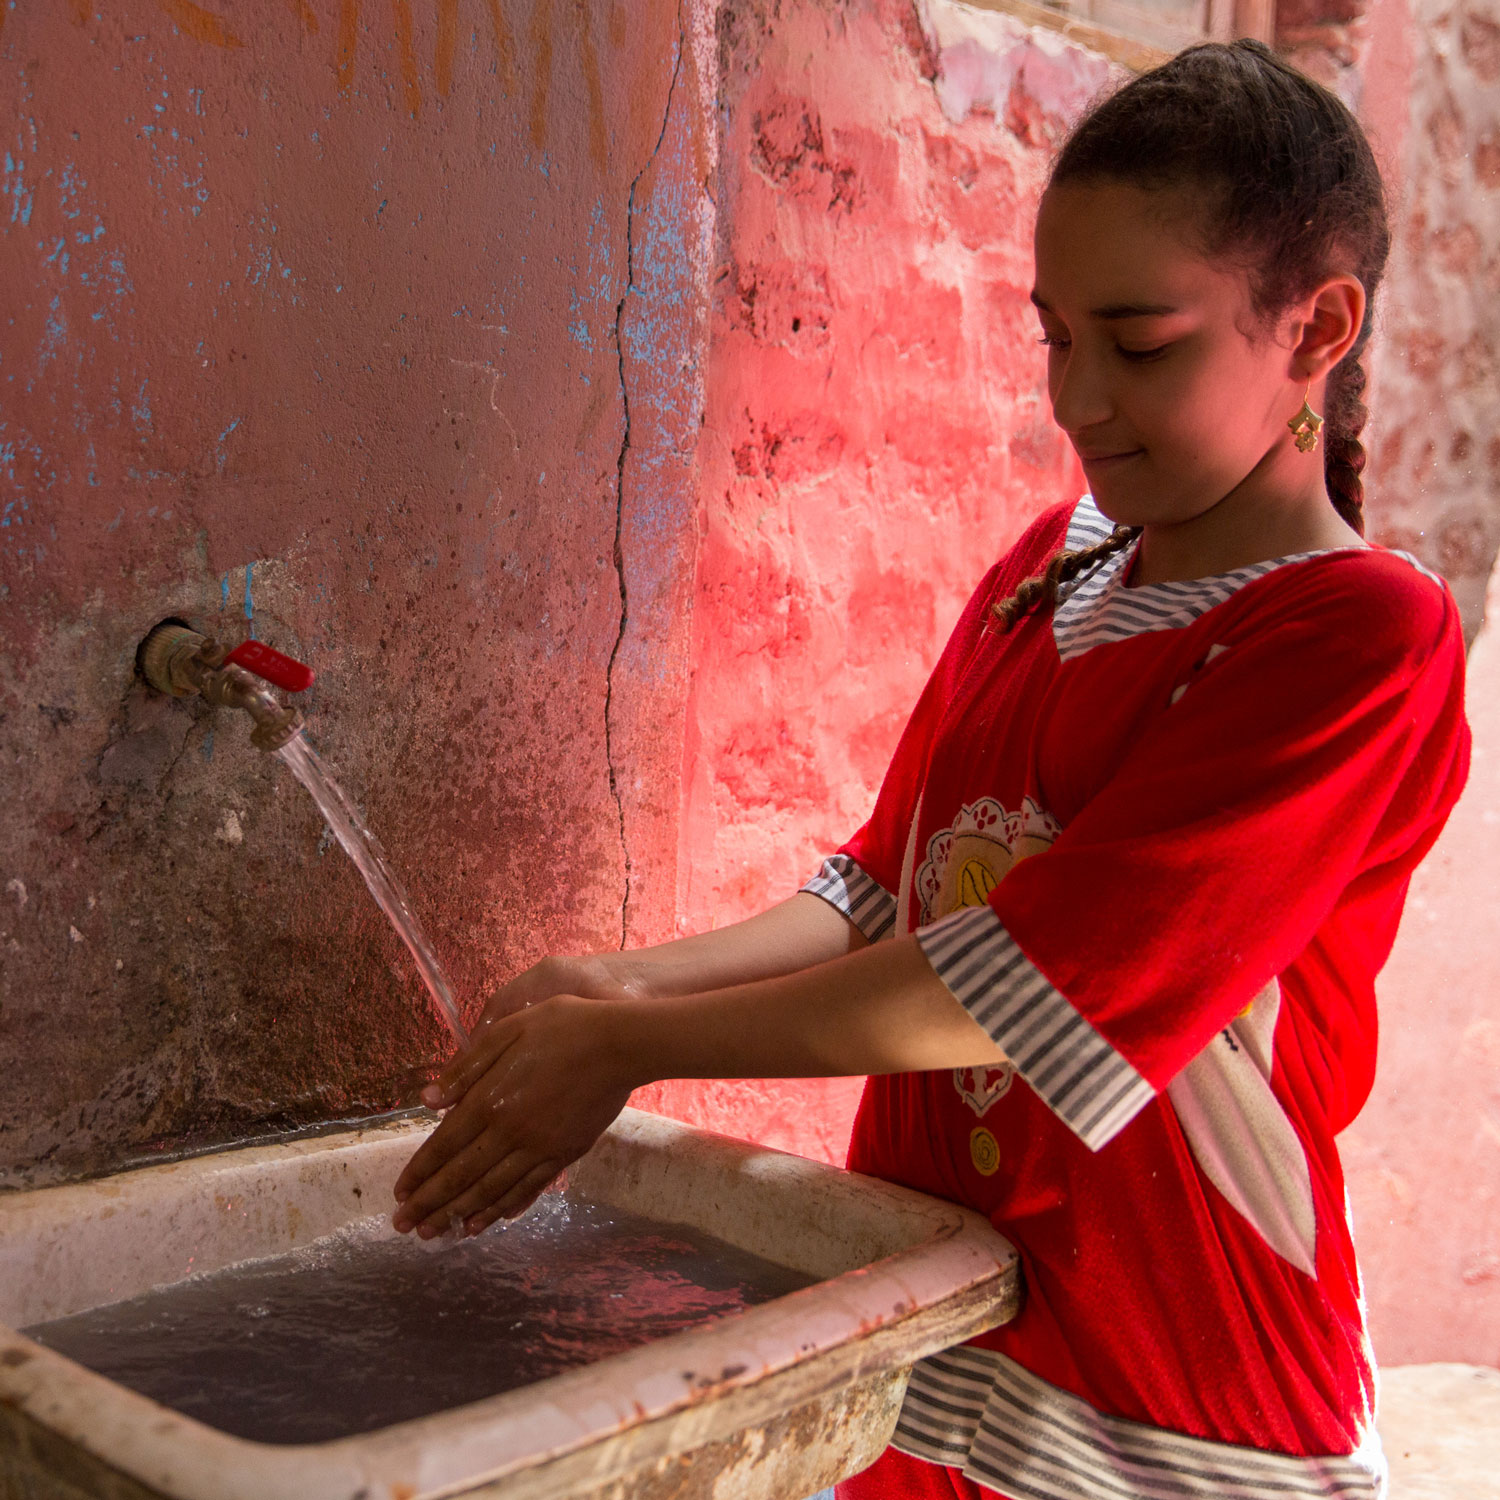  Esraa, 11, washes her hands in her home in Beni Edrees, while Heba talks to her mother about her satisfaction with the waste water services.  She shared they now shower much more often as they no longer have to worry about their septic tank overflowing. Their tank used to fill up every week, which was very expensive to drain.   Photo for USAID/Egypt.  